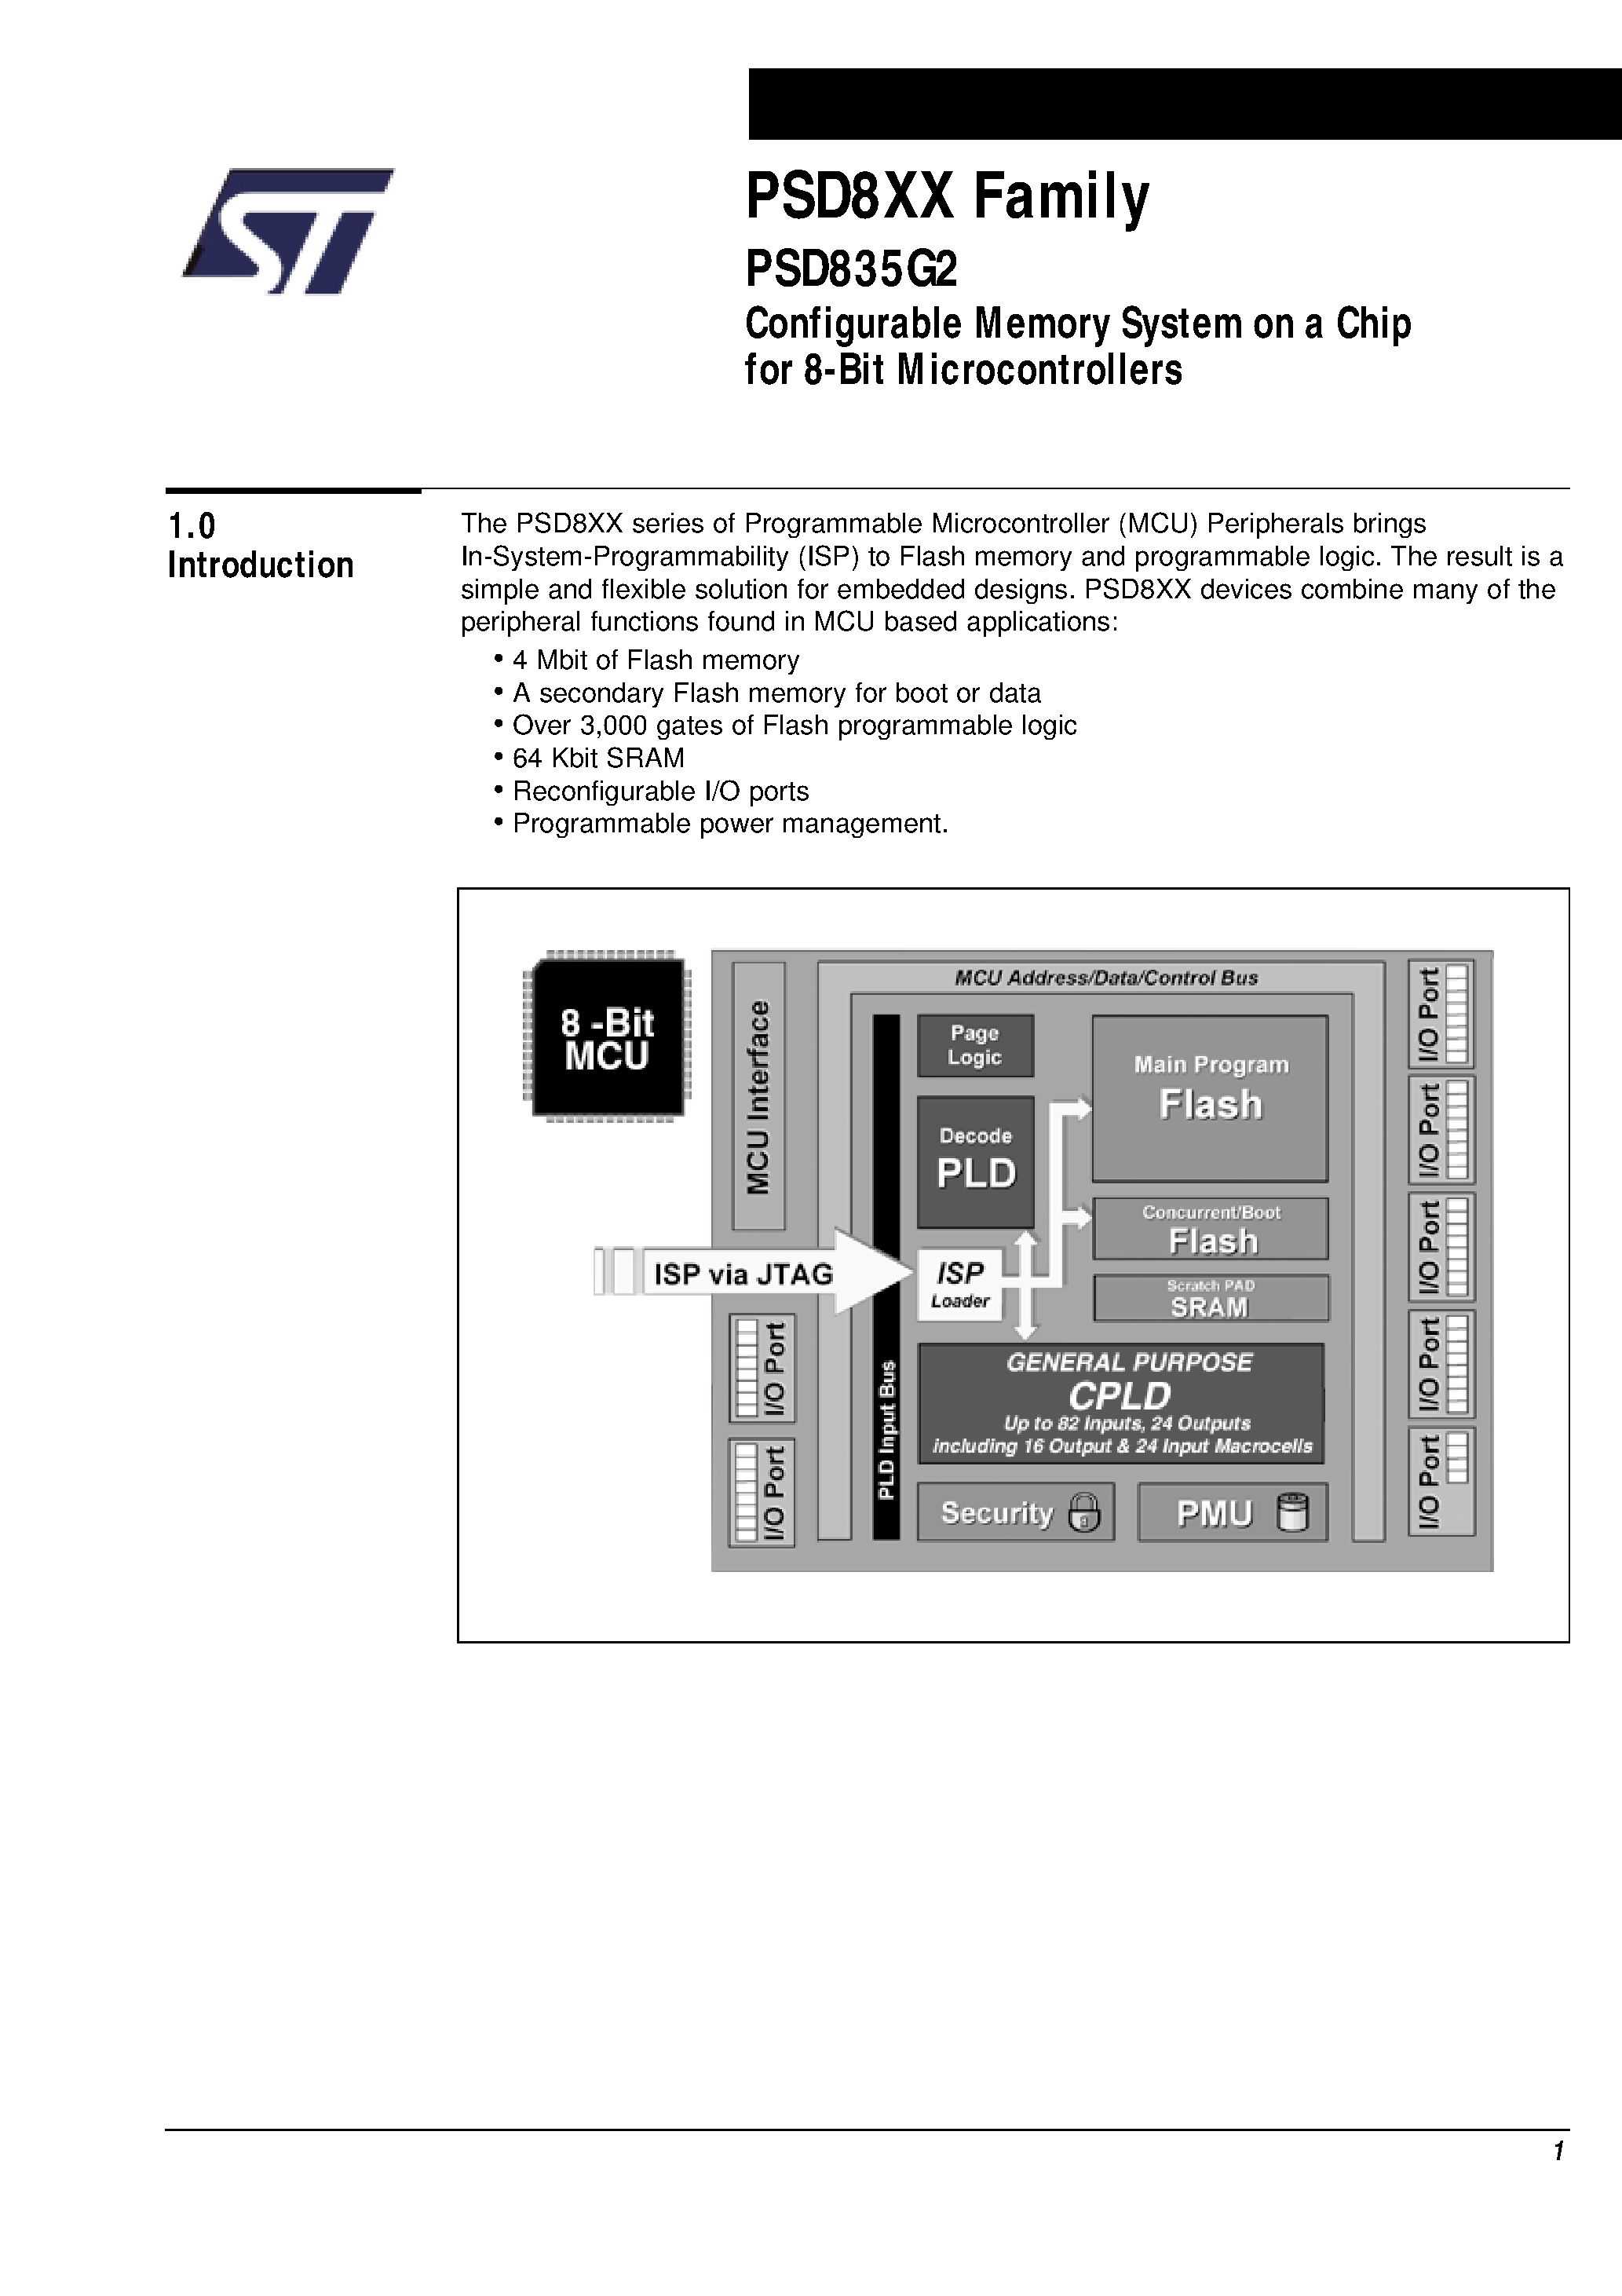 Datasheet PSD835F2-A-90UI - Configurable Memory System on a Chip for 8-Bit Microcontrollers page 2